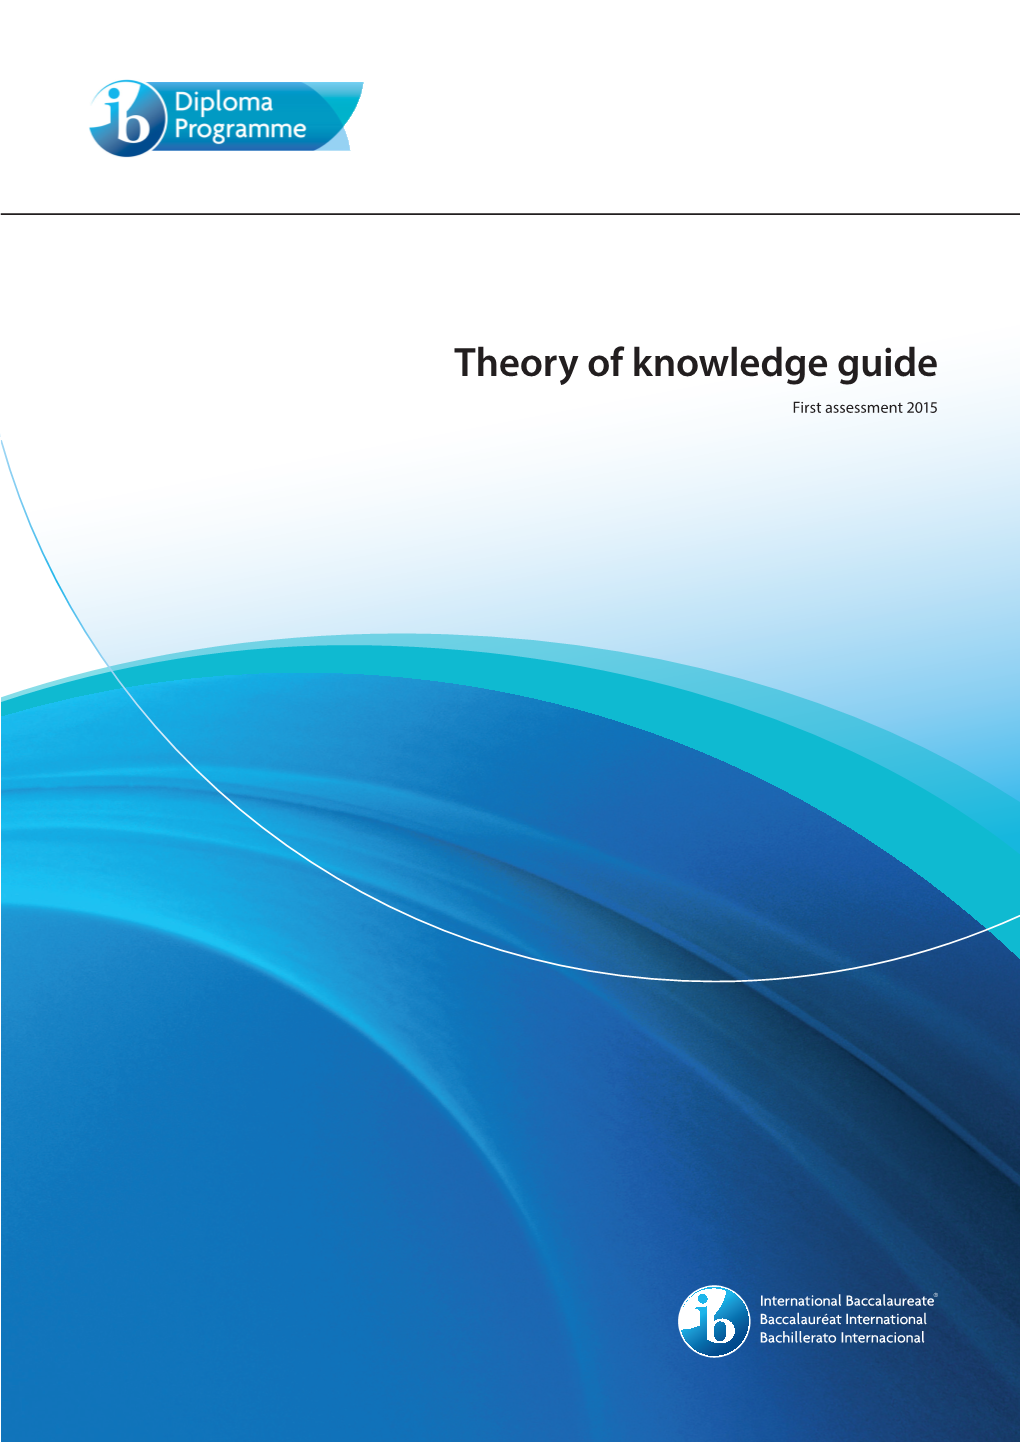 Theory of Knowledge Guide First Assessment 2015